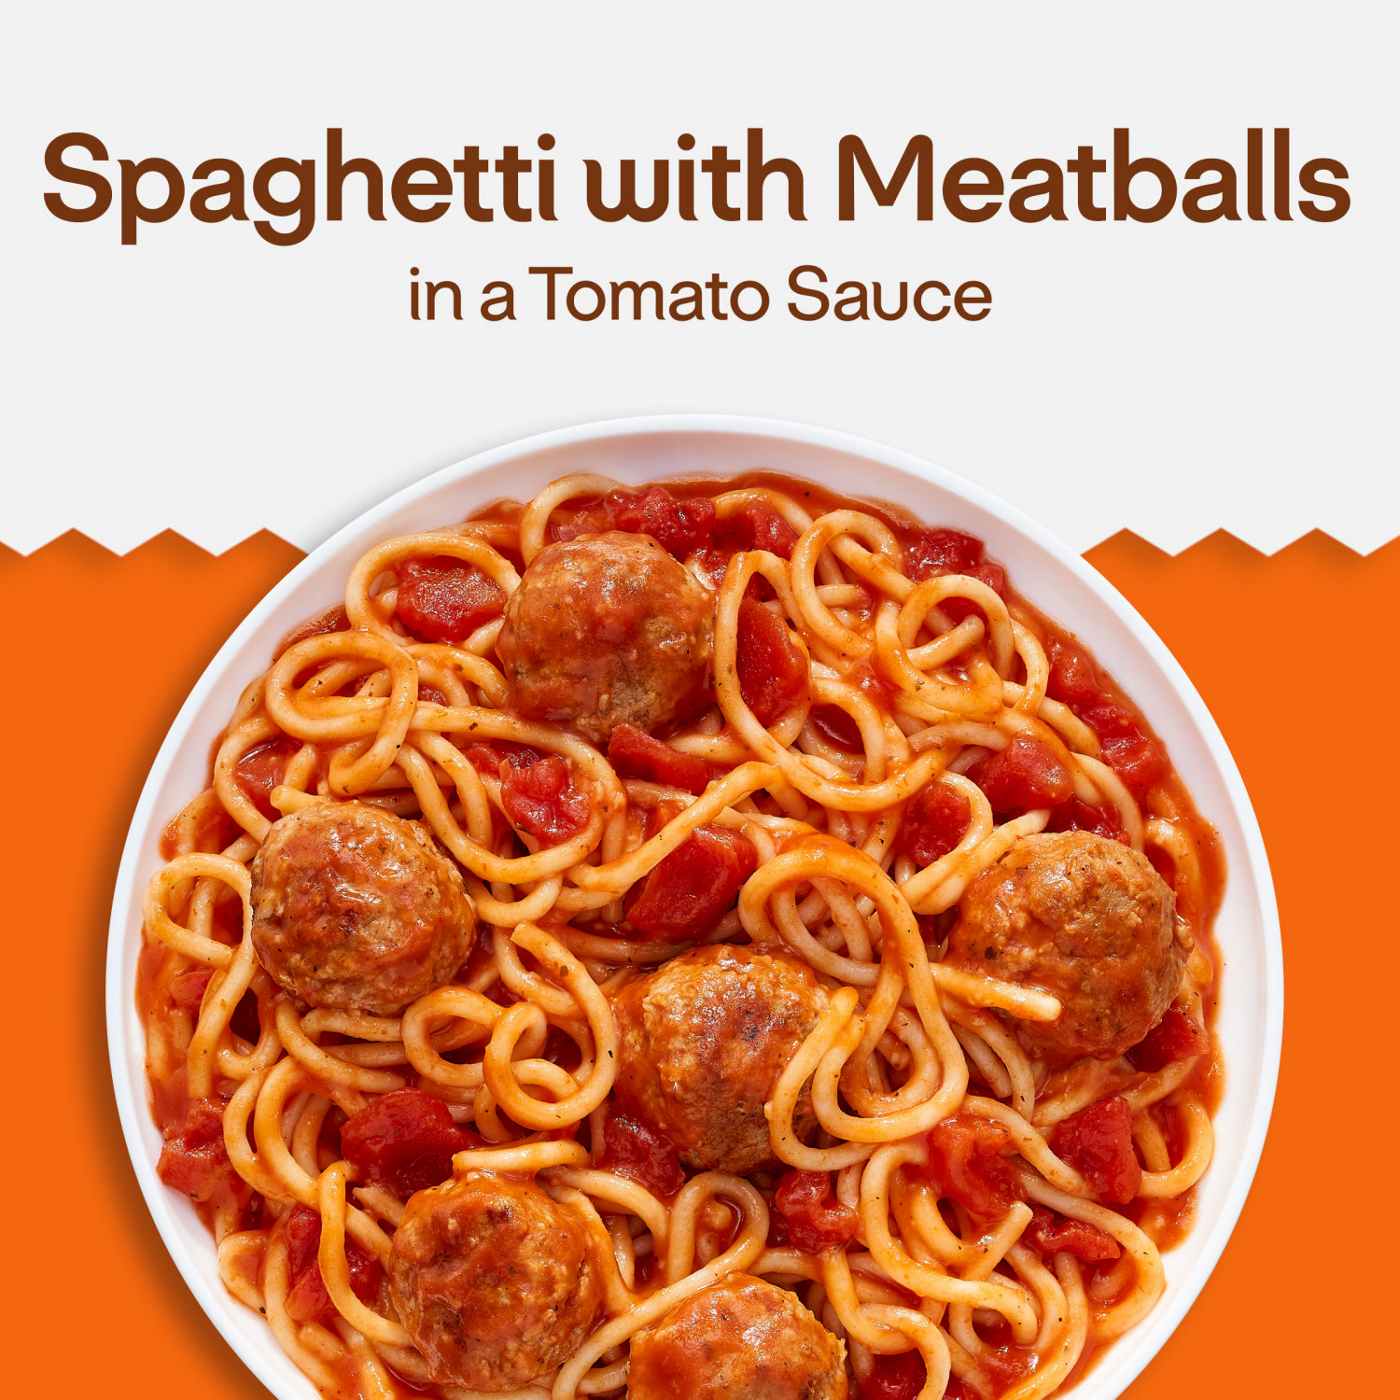 Lean Cuisine 17g Protein Spaghetti & Meatballs Frozen Meal; image 4 of 7